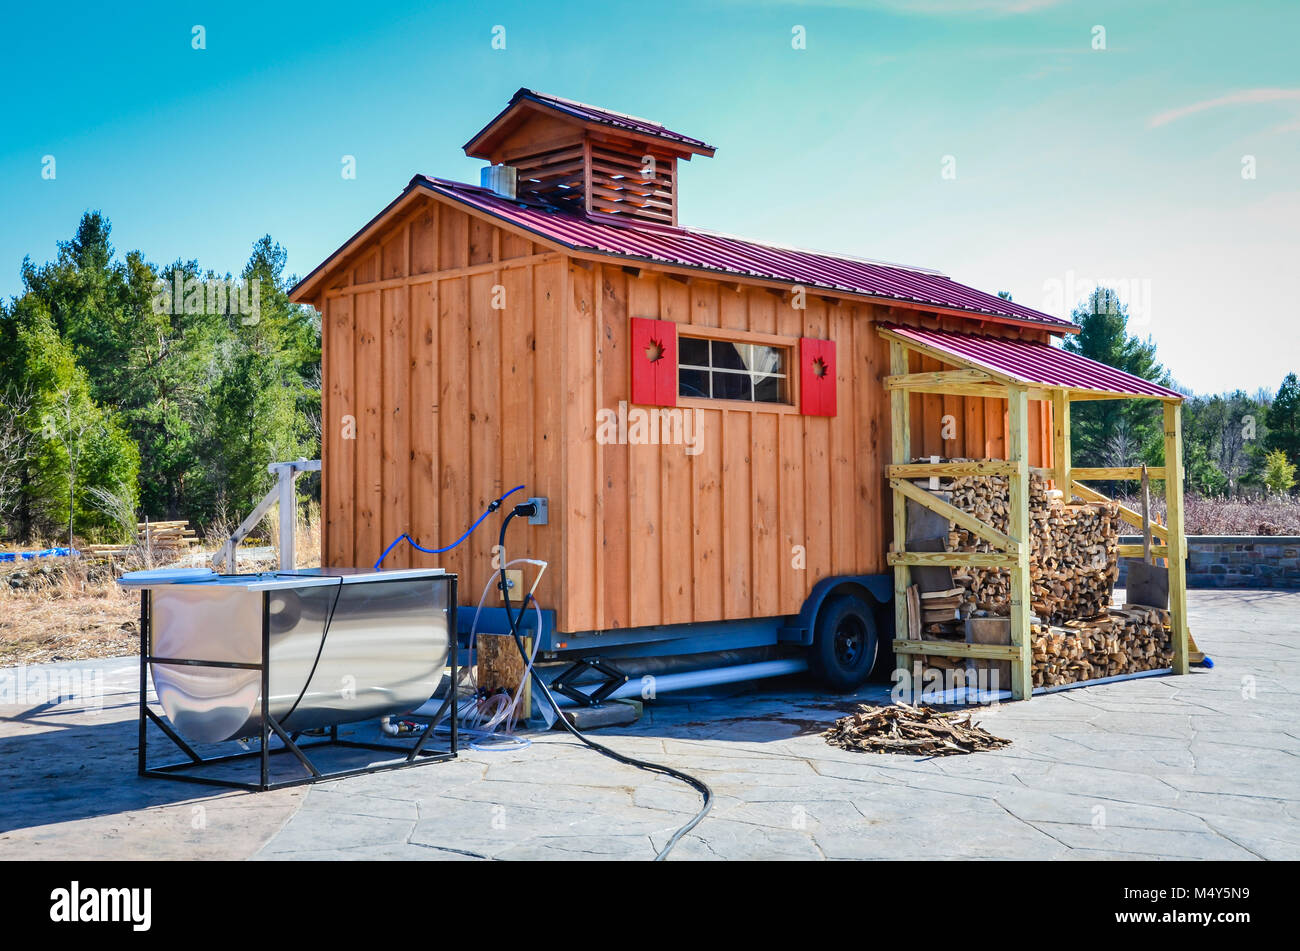 Mobile sugar shack on wheels with red maple leaf shutters and a stainless steel evaporator set outdoors. Stock Photo